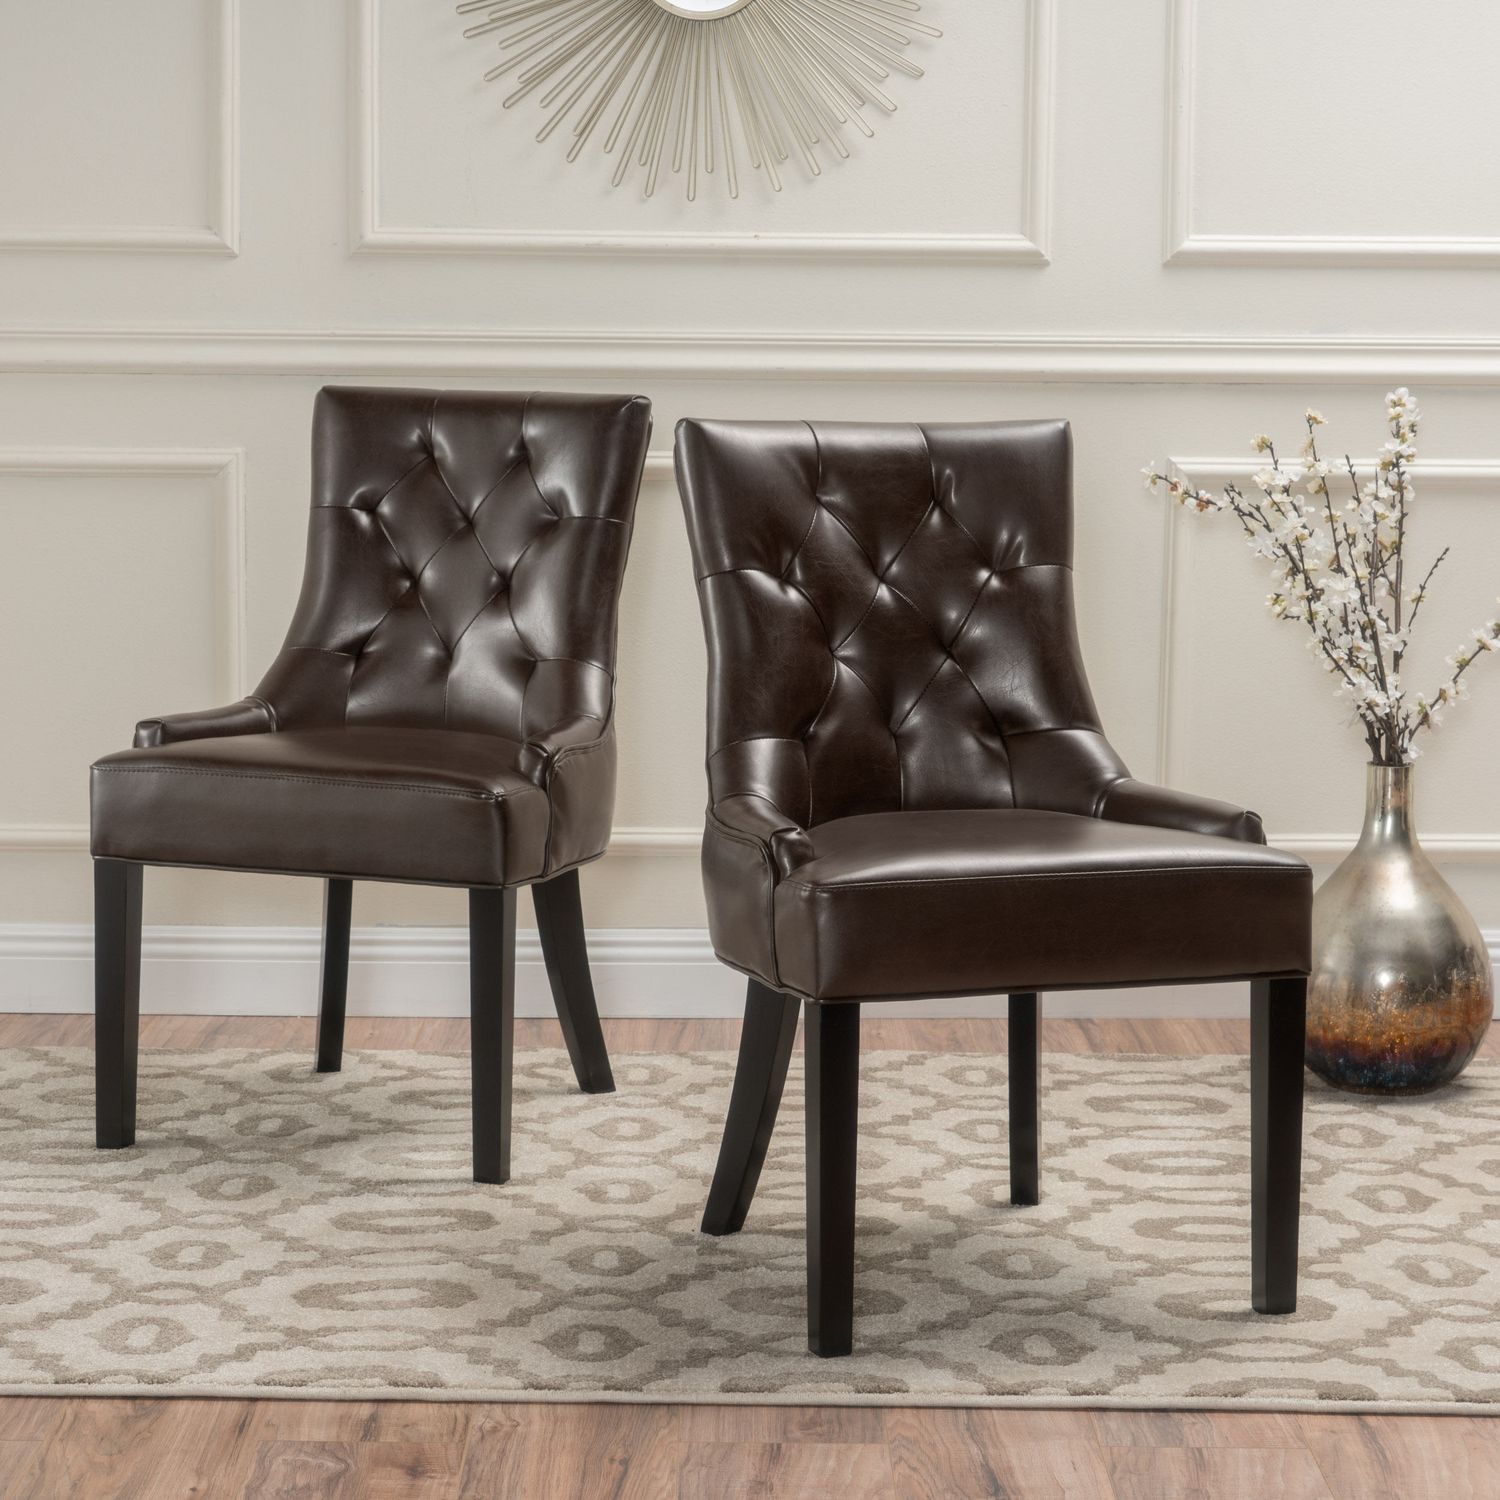 Harley Tufted Brown Leather Dining Chair (Set of 2) | Walmart Canada